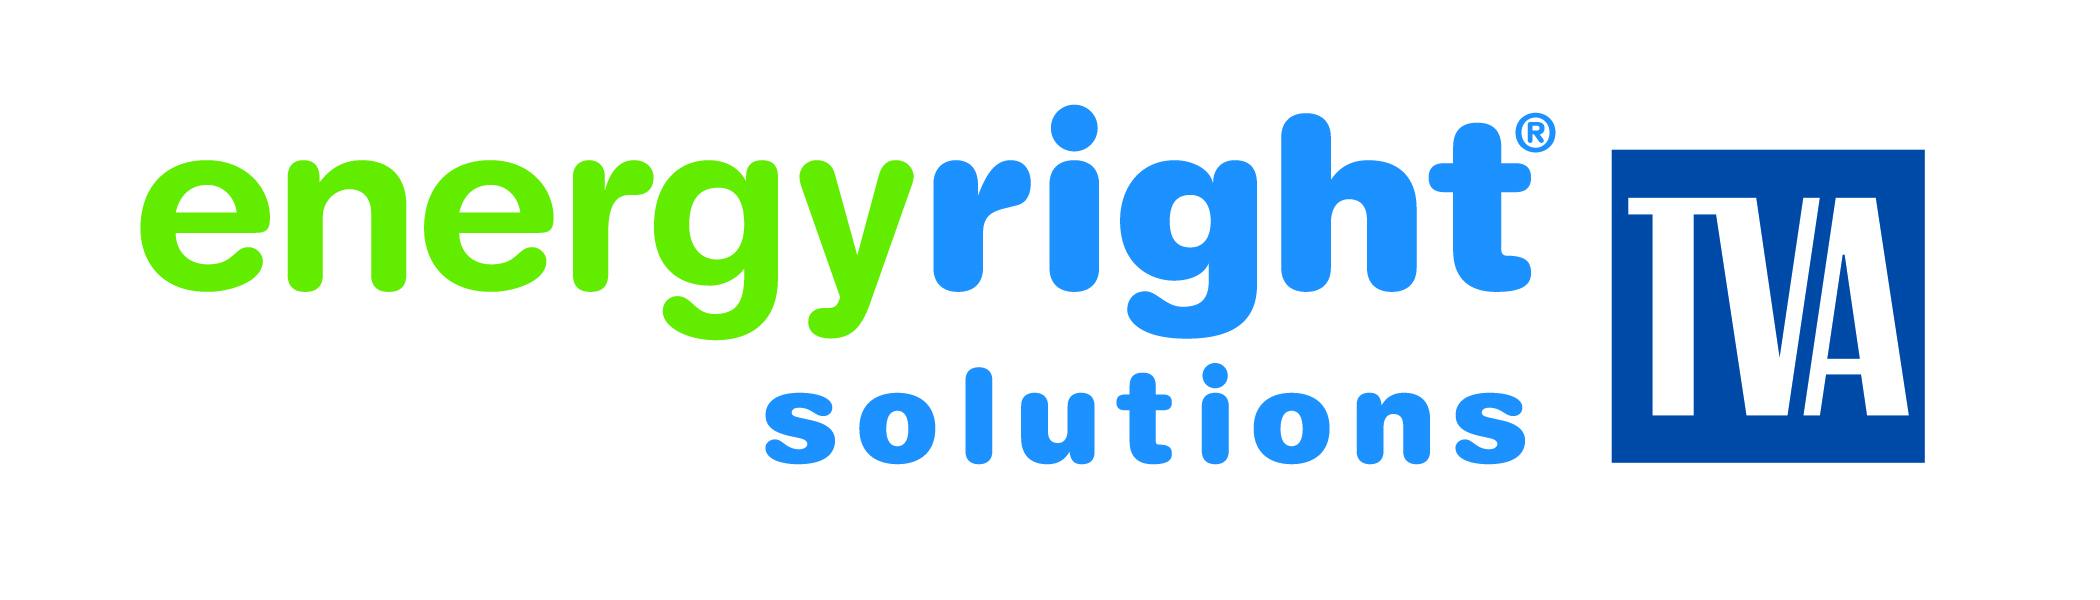 The Right Solutions Logo photo - 1